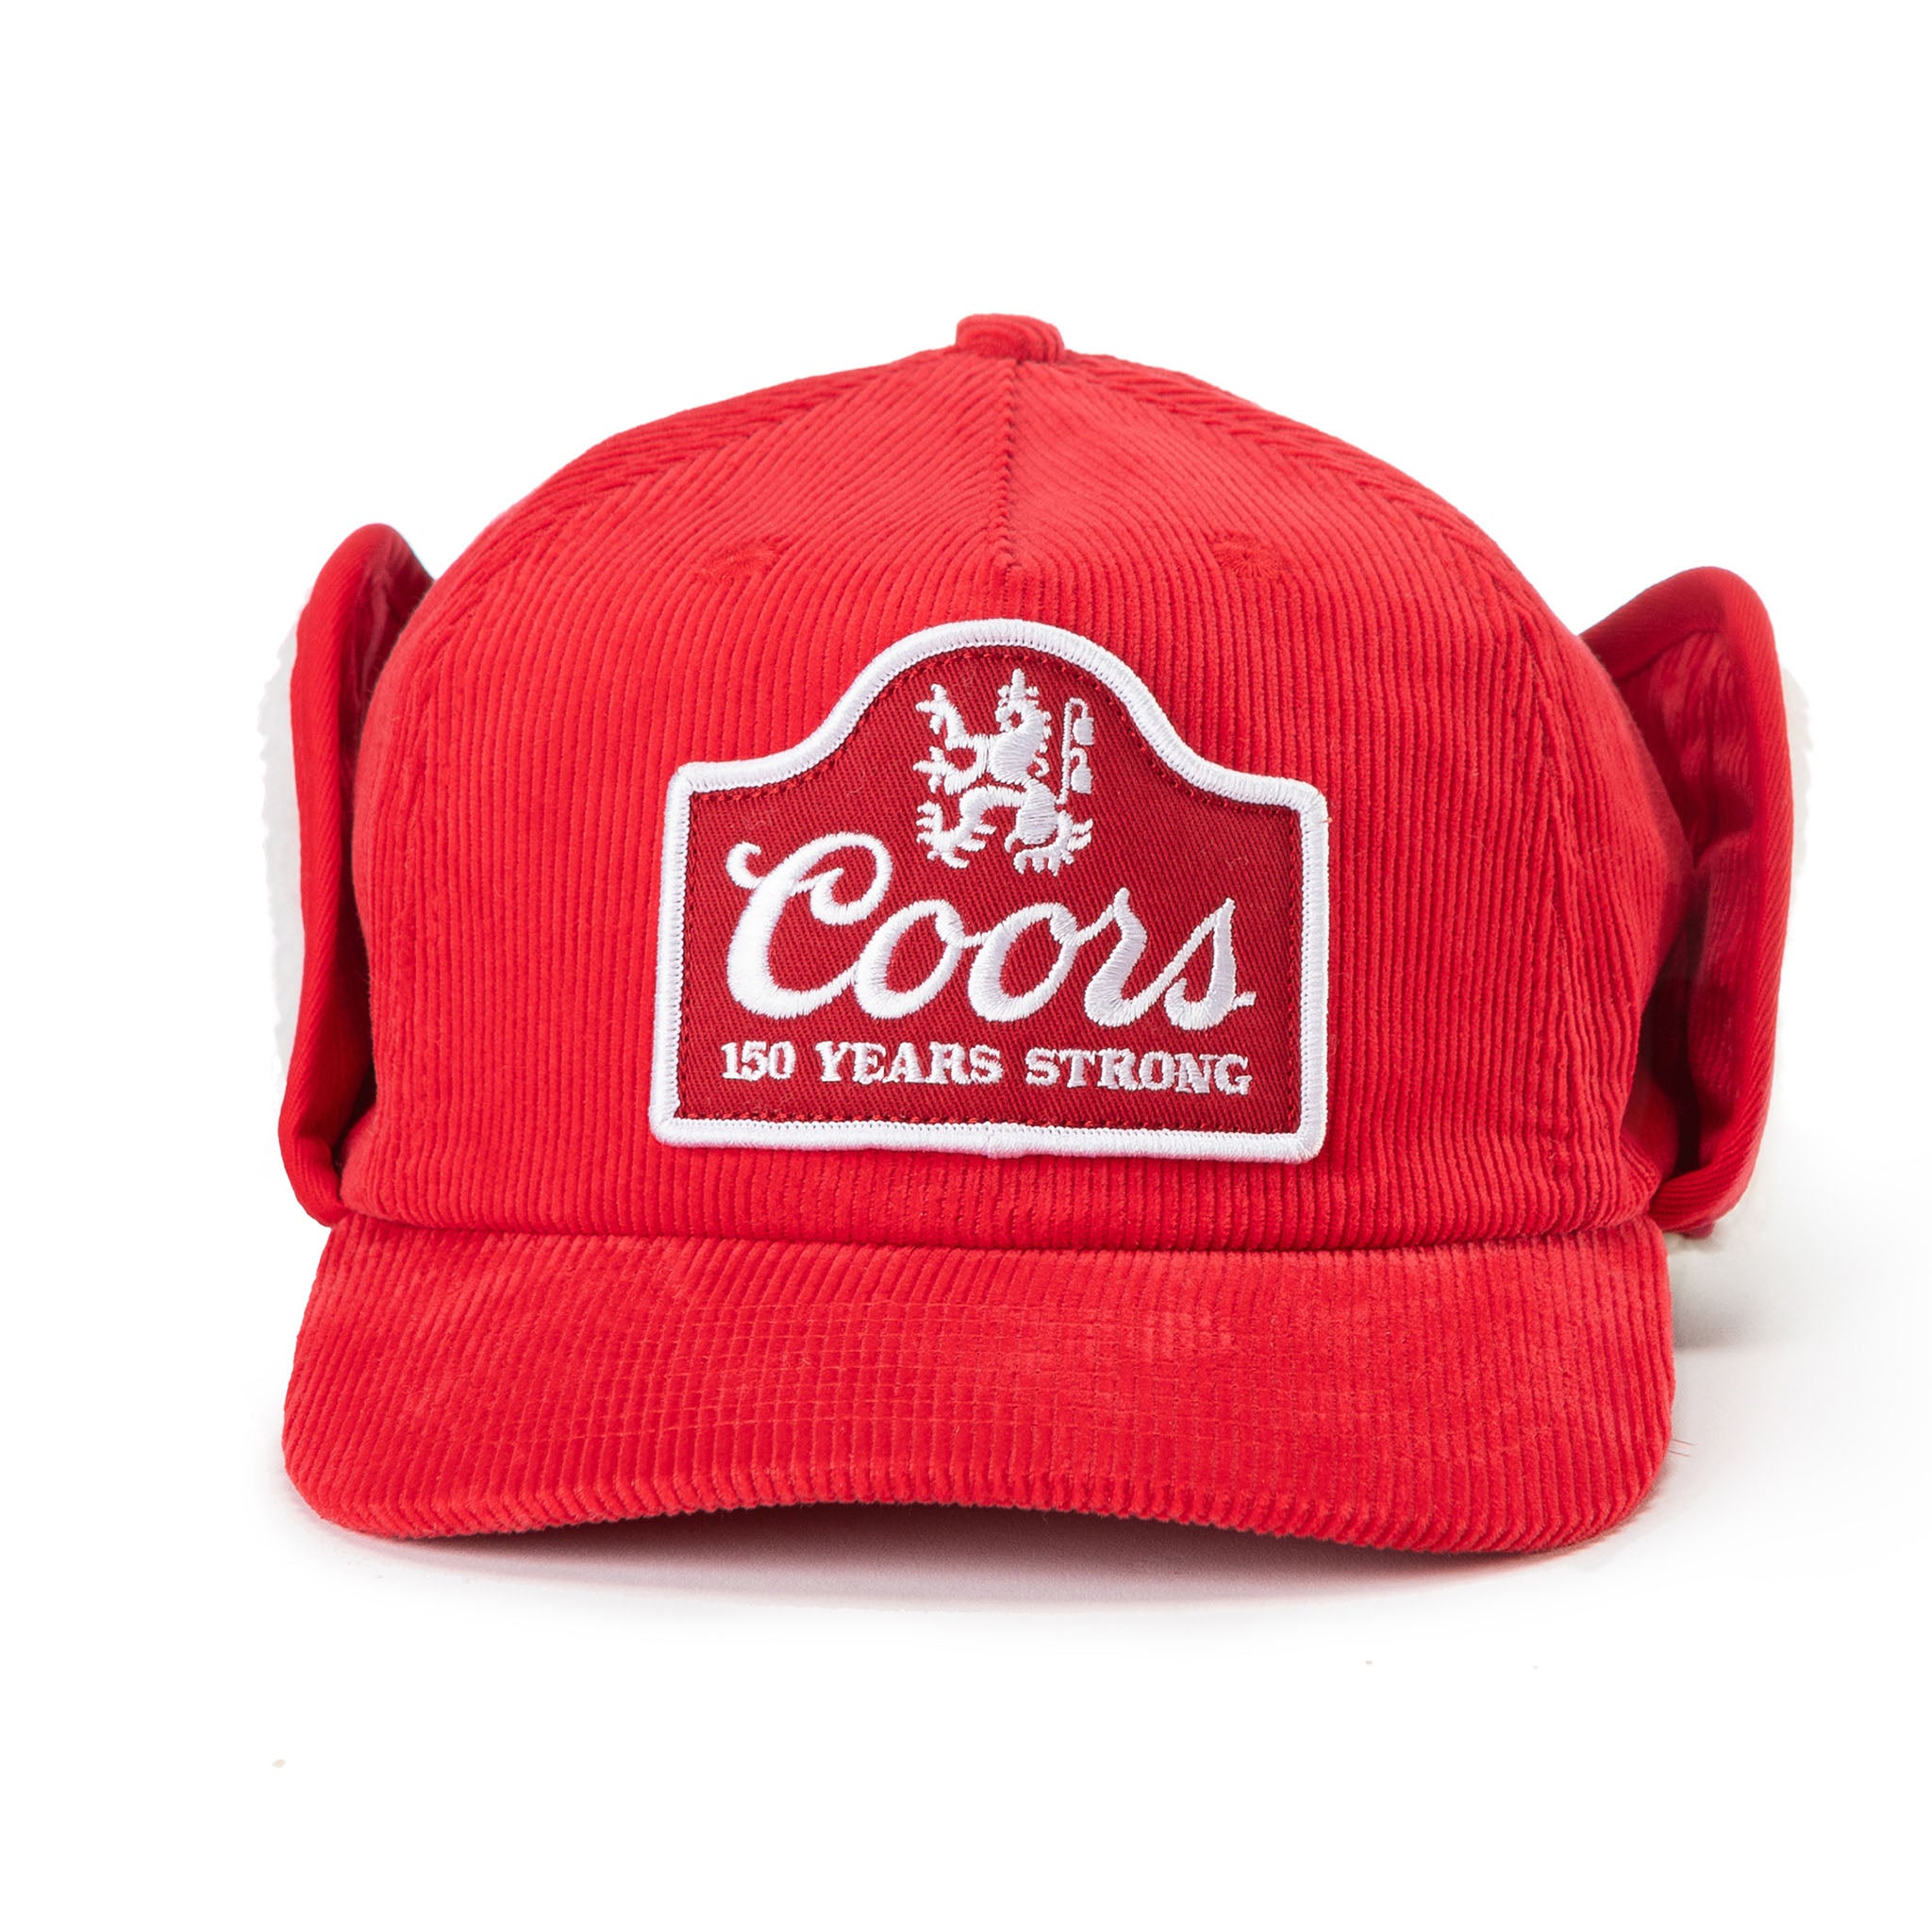 SEAGER X COORS BANQUET 150 CORDUROY FLAPJACK